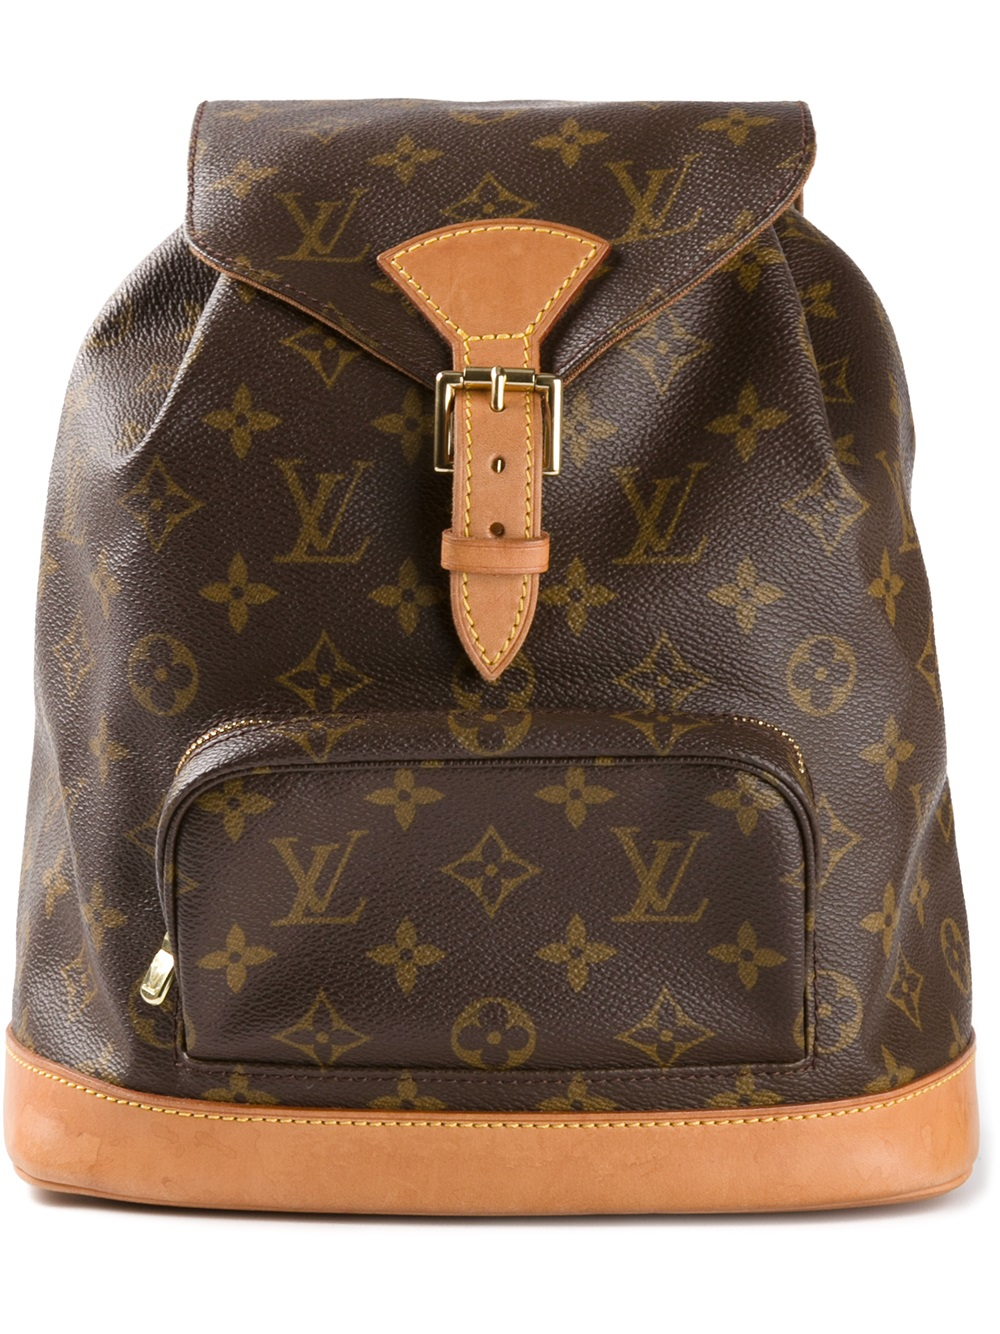 Lyst - Louis Vuitton Monogrammed Back Pack in Brown